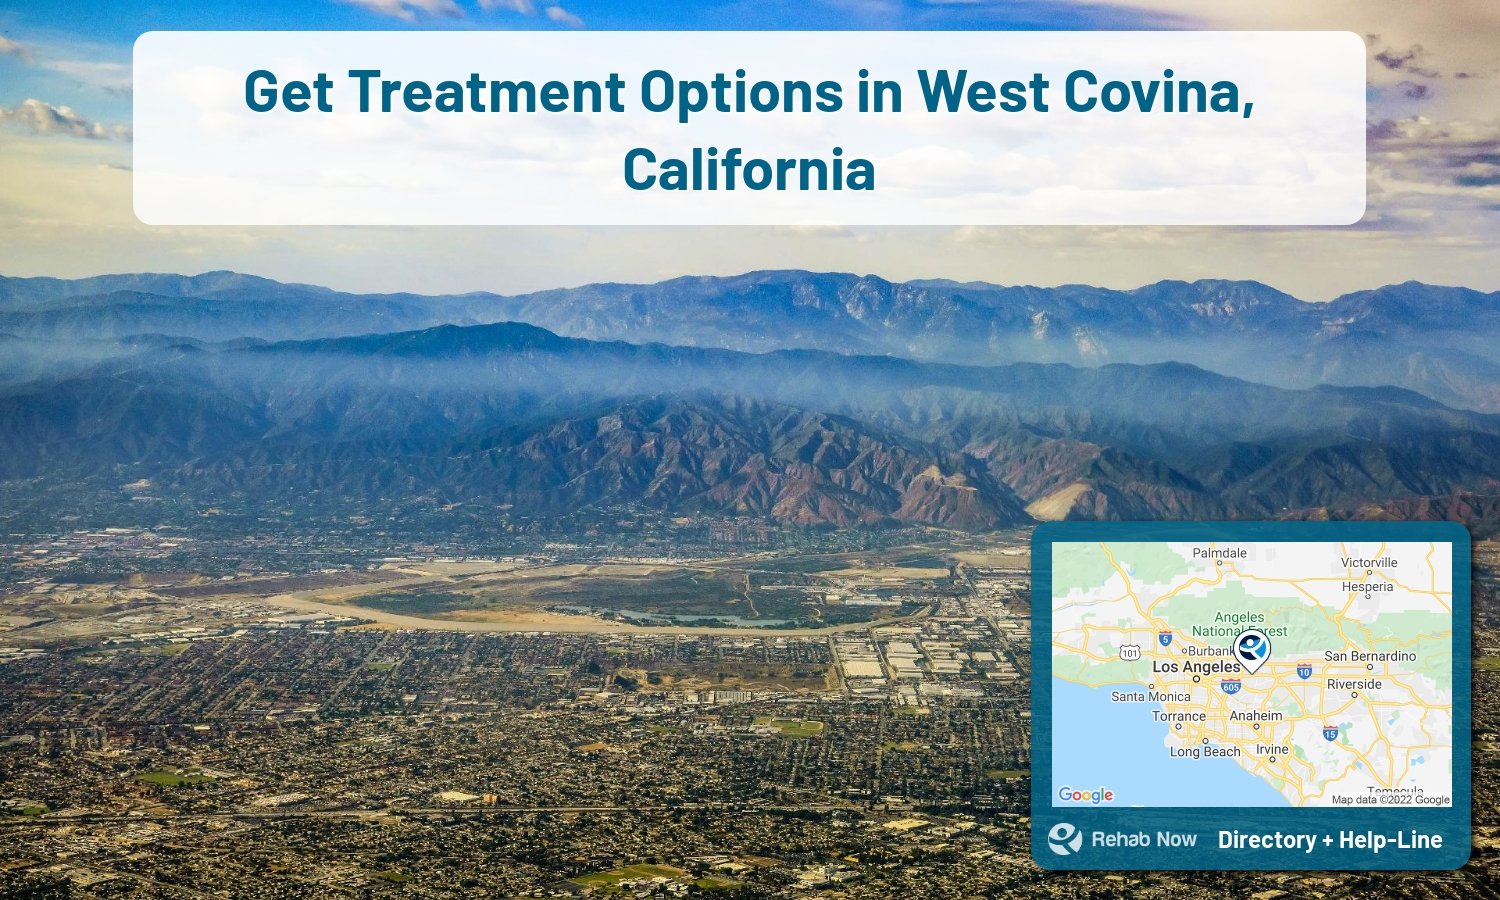 West Covina, CA Treatment Centers. Find drug rehab in West Covina, California, or detox and treatment programs. Get the right help now!